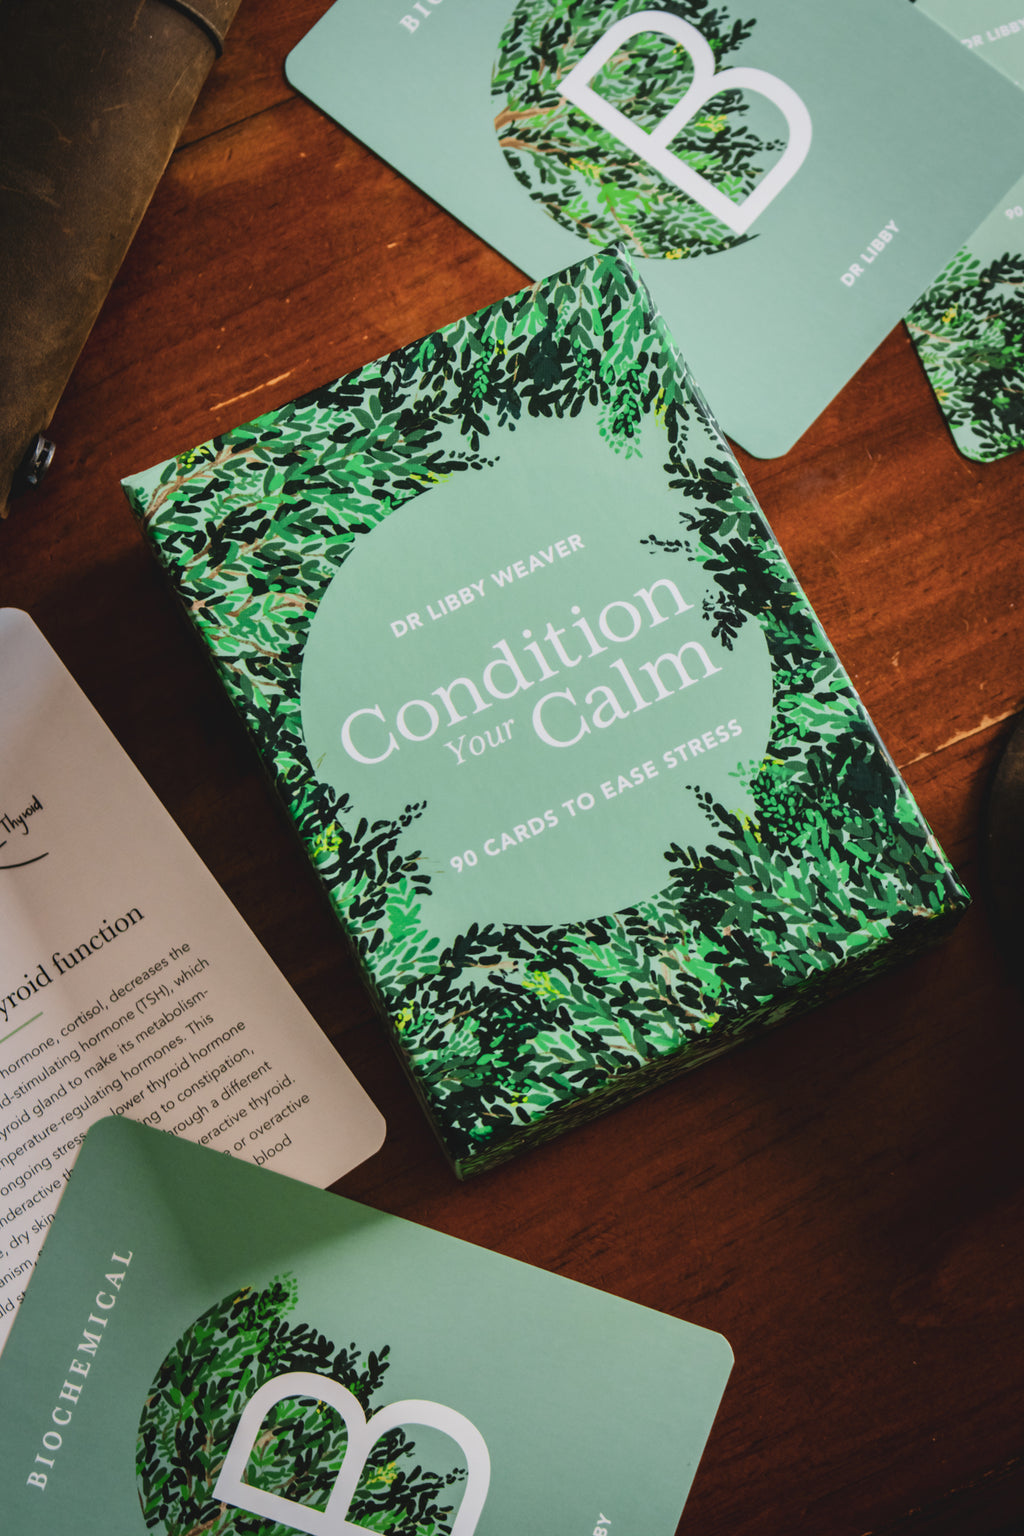 Condition Your Calm 90 cards To Ease Stress